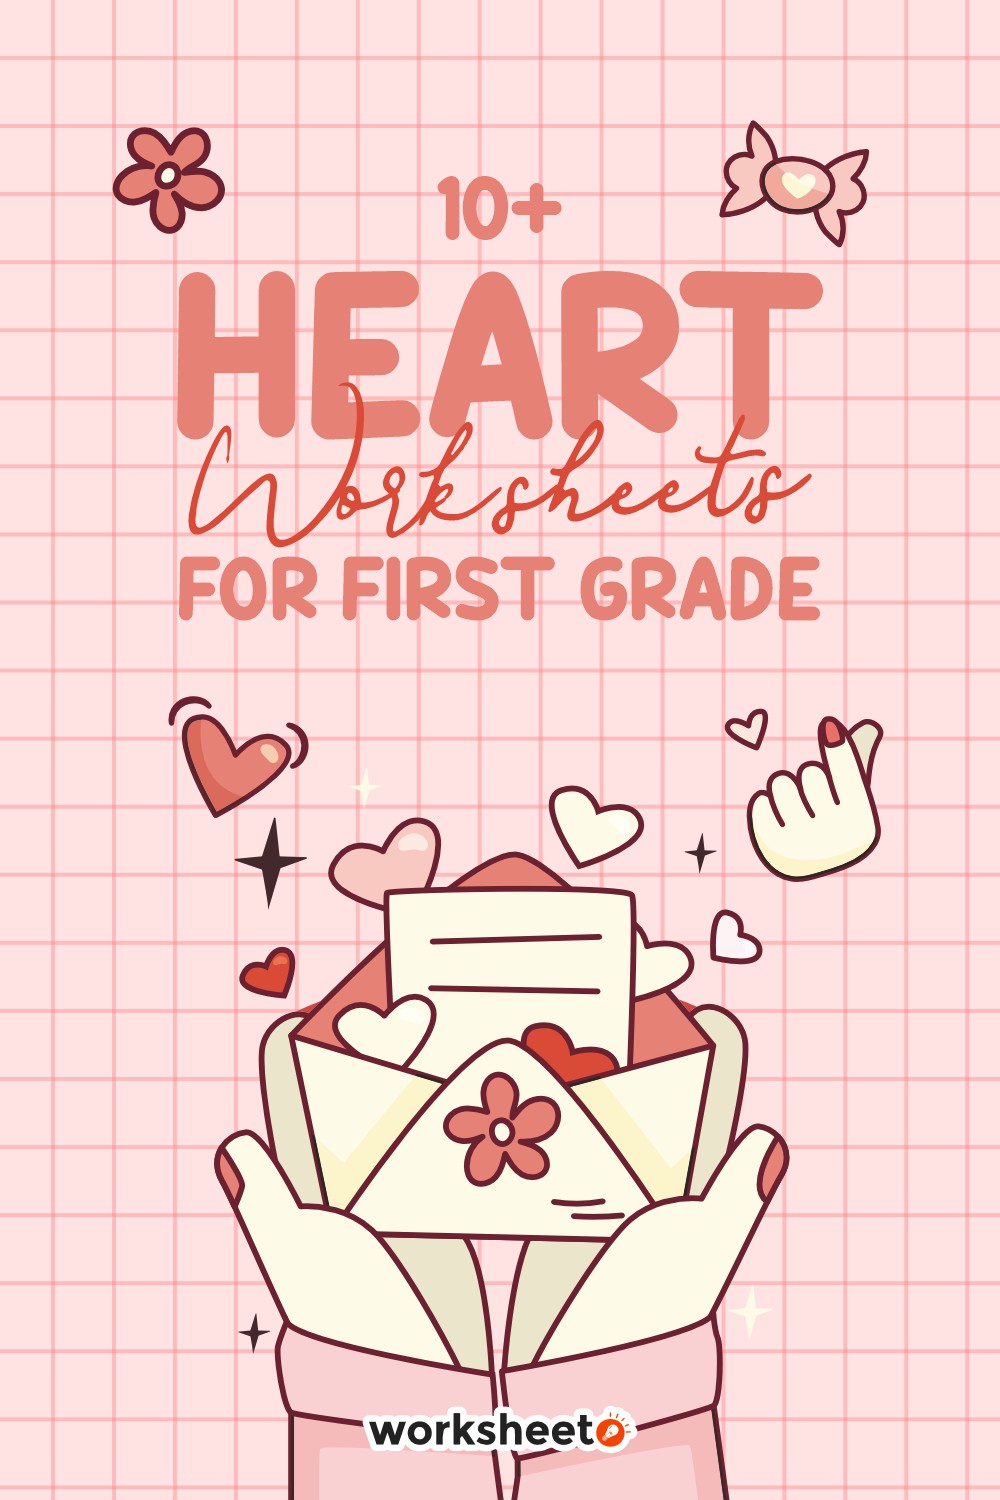 15 Images of Heart Worksheets For First Grade